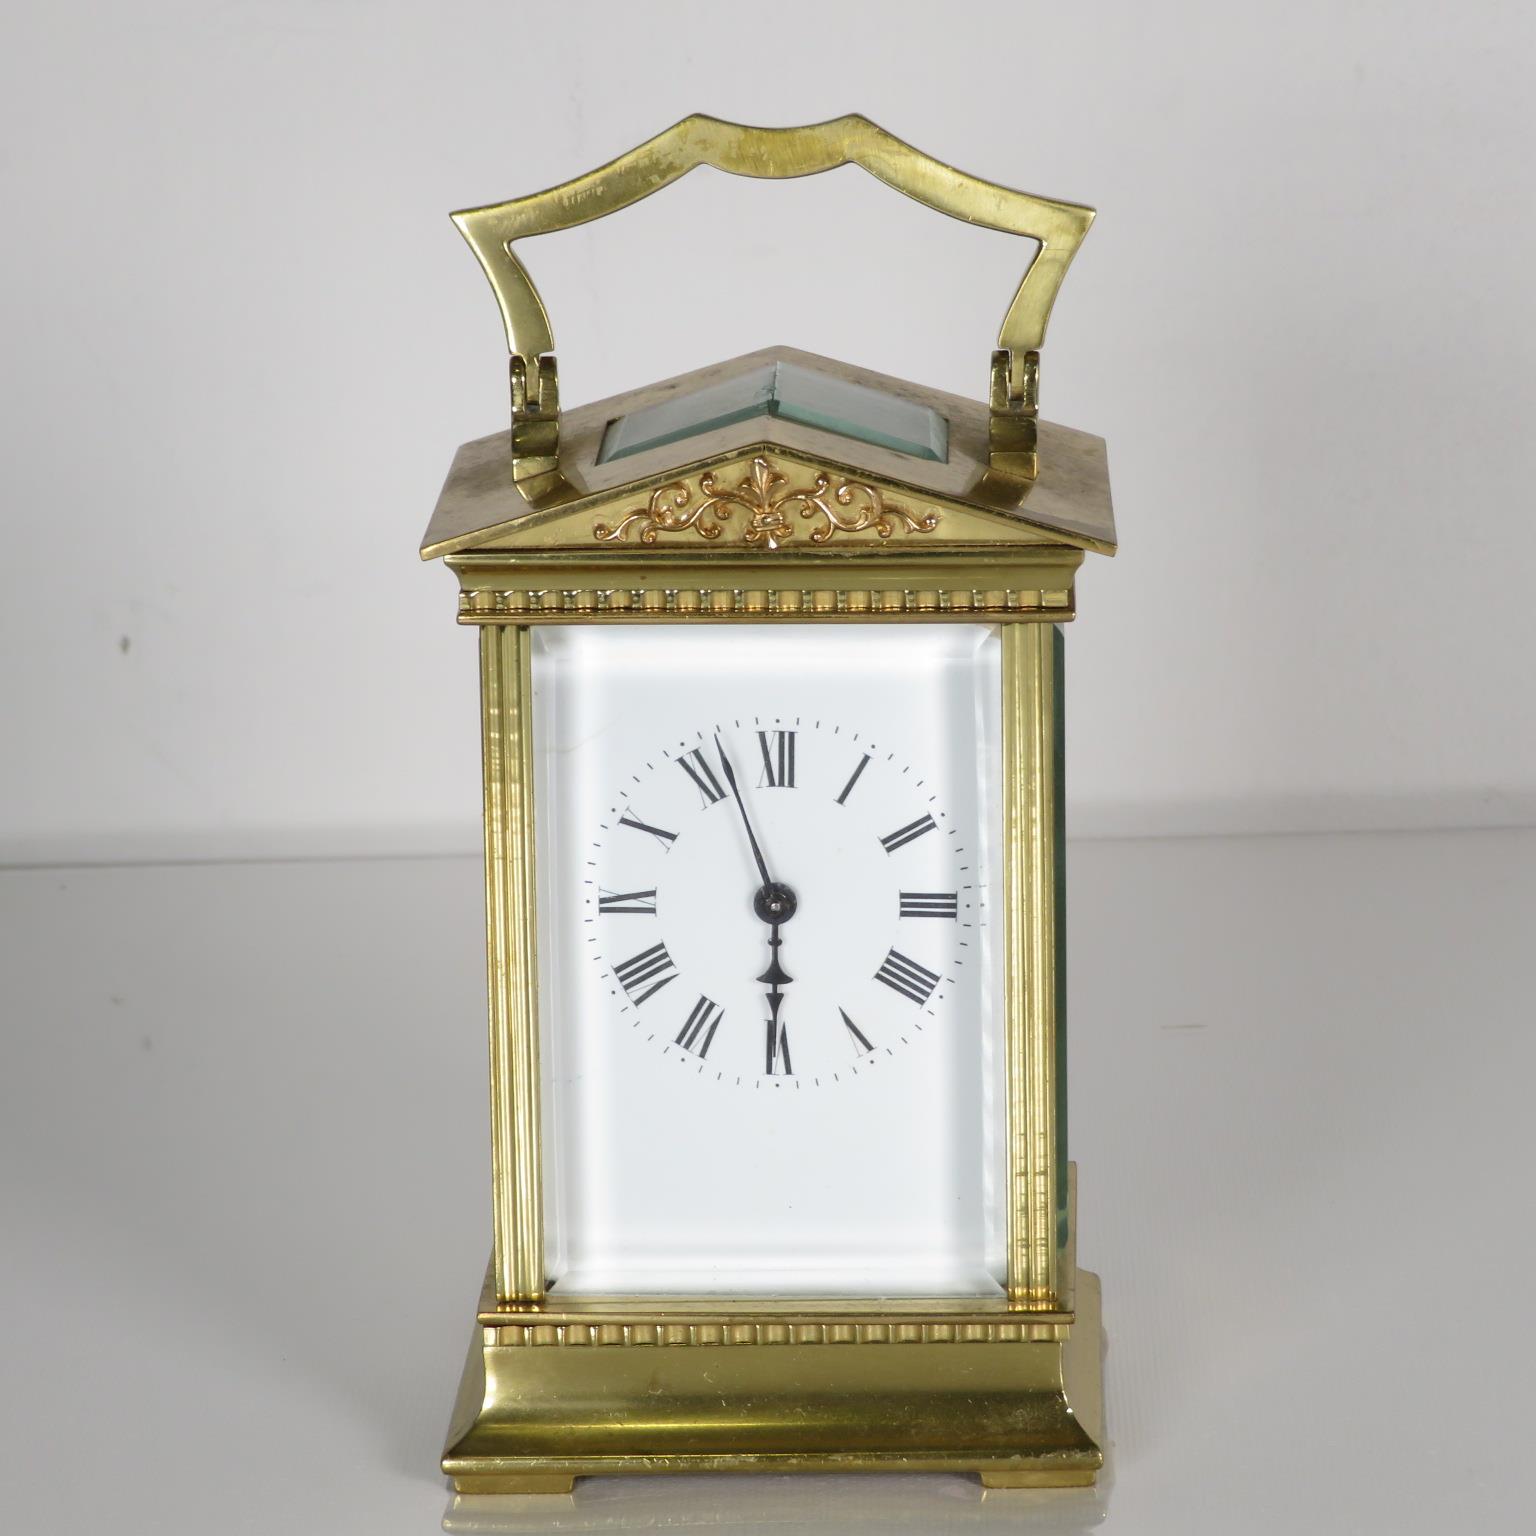 A midsize carriage clock 130mm x 70mm. Fully running //